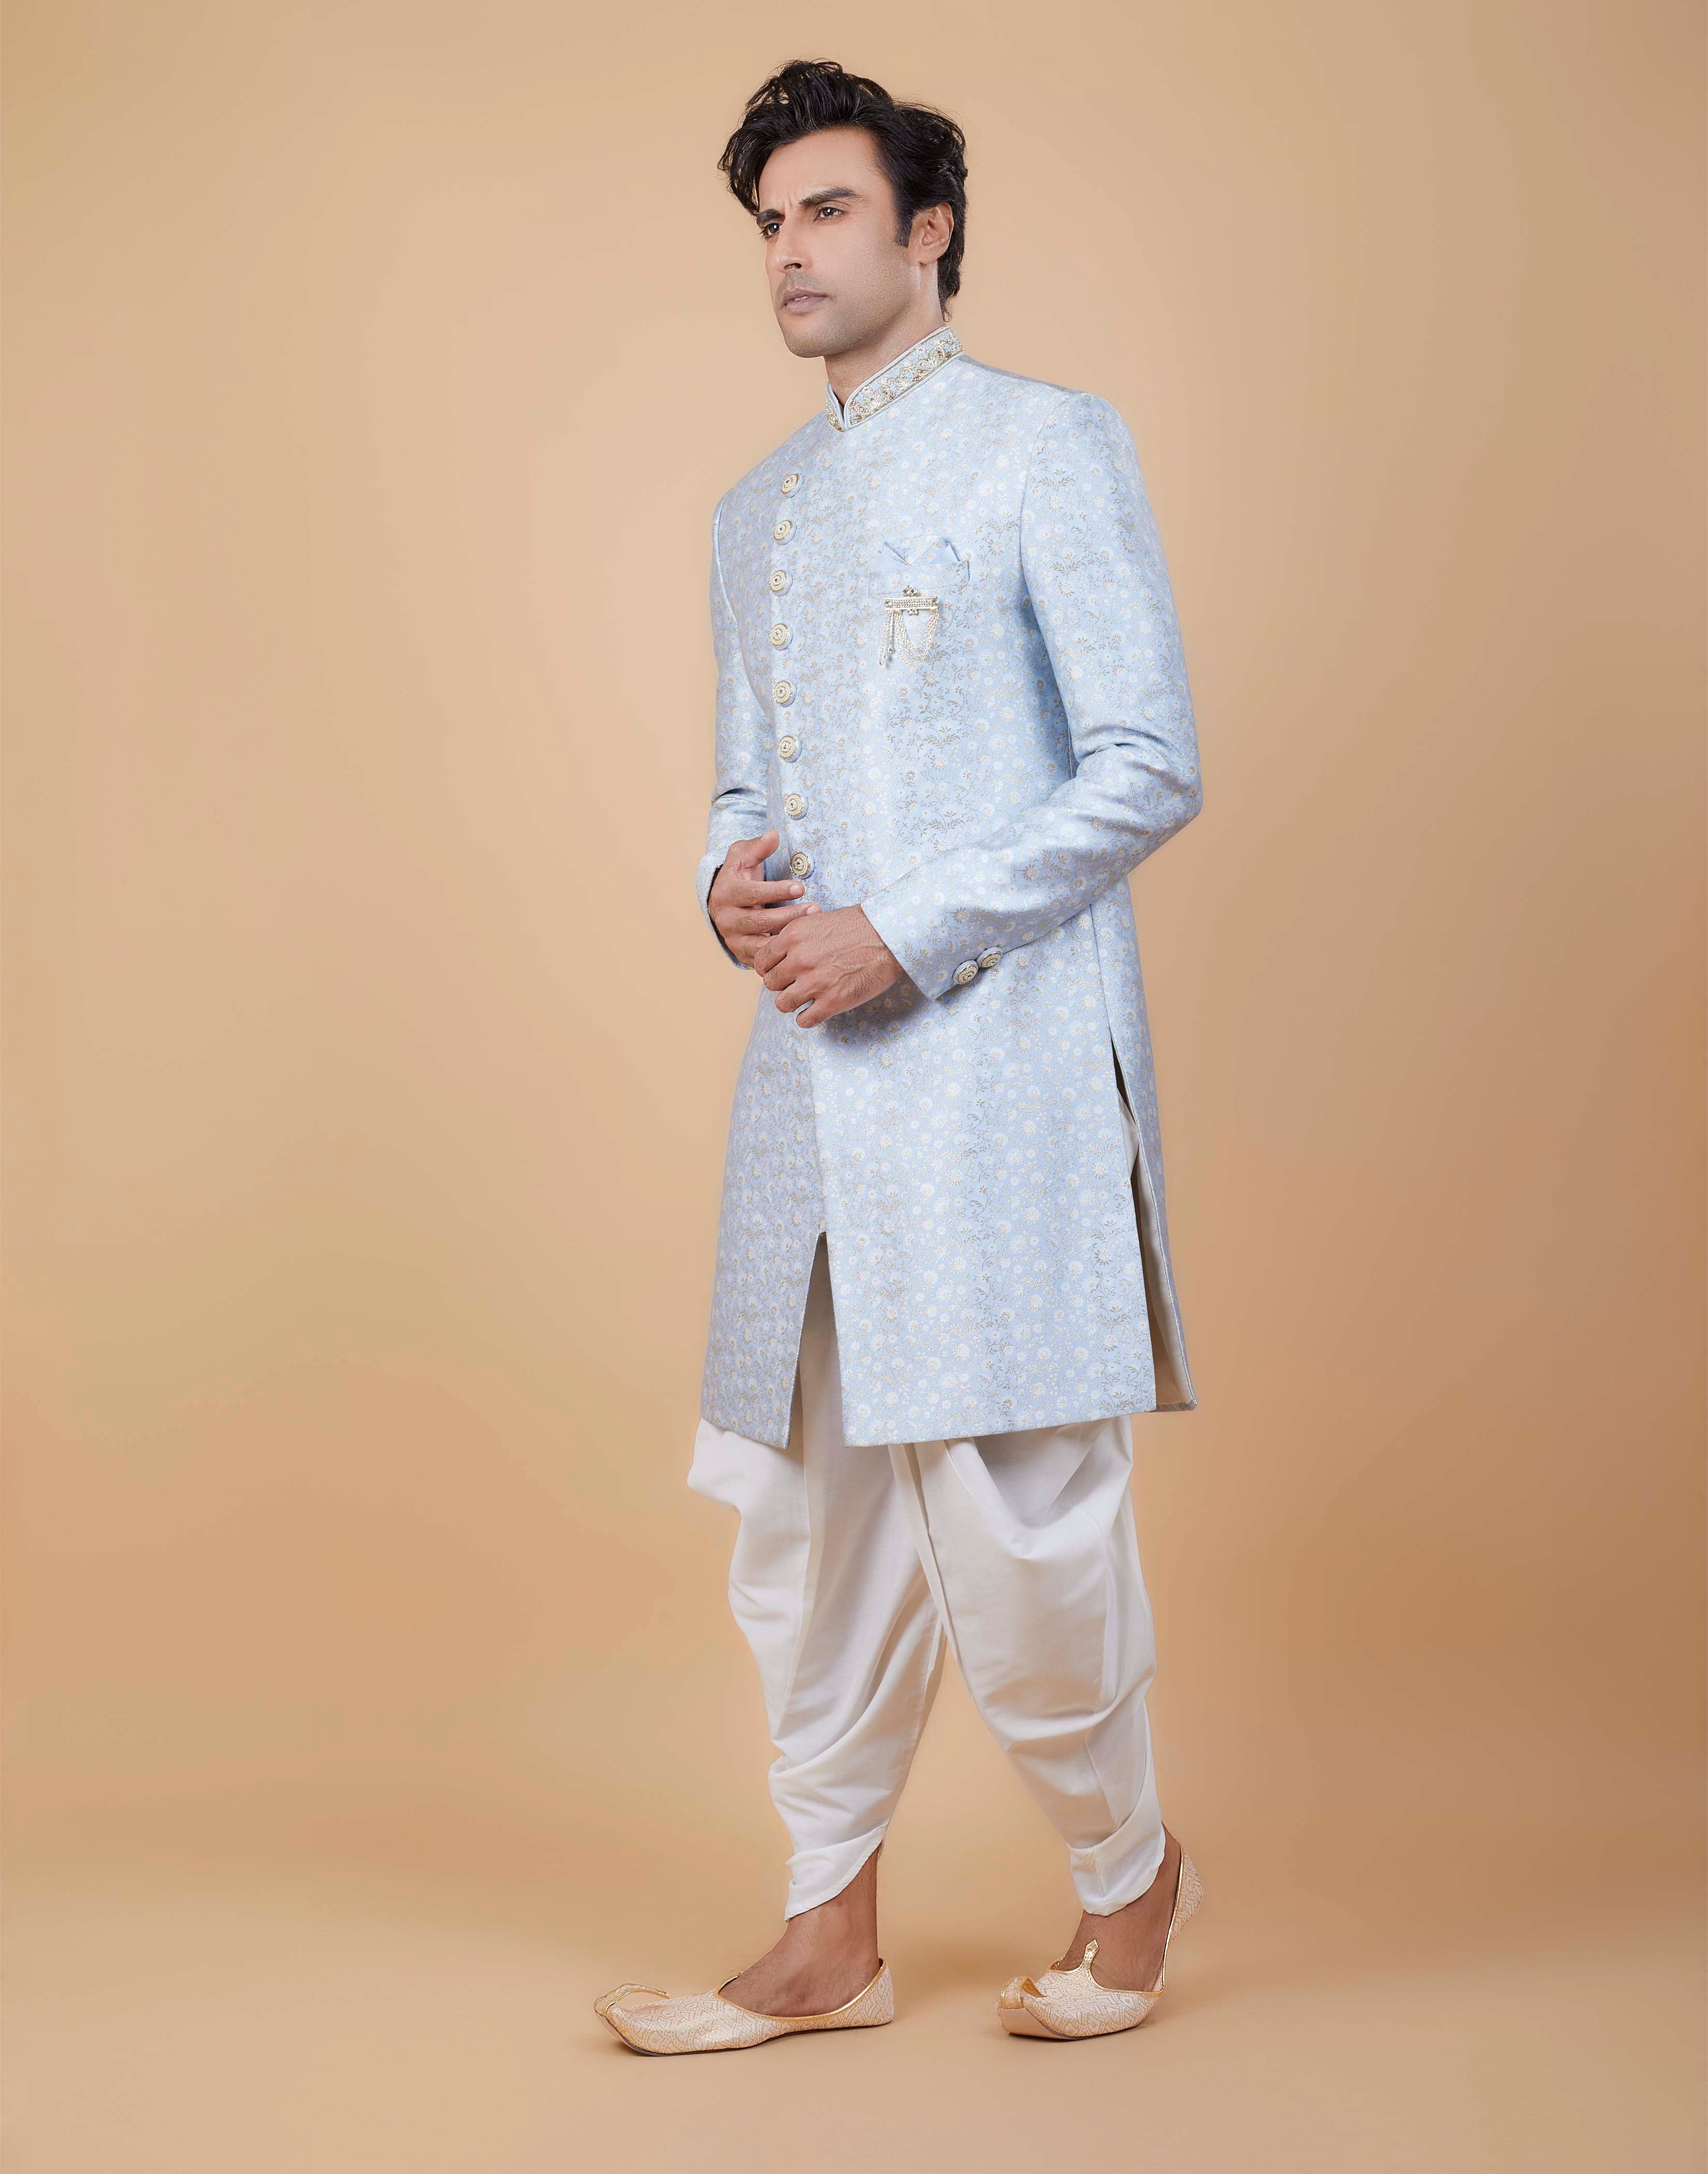 Indo-Western for Male Outfit Ideas That'll Make You Look Dapper!